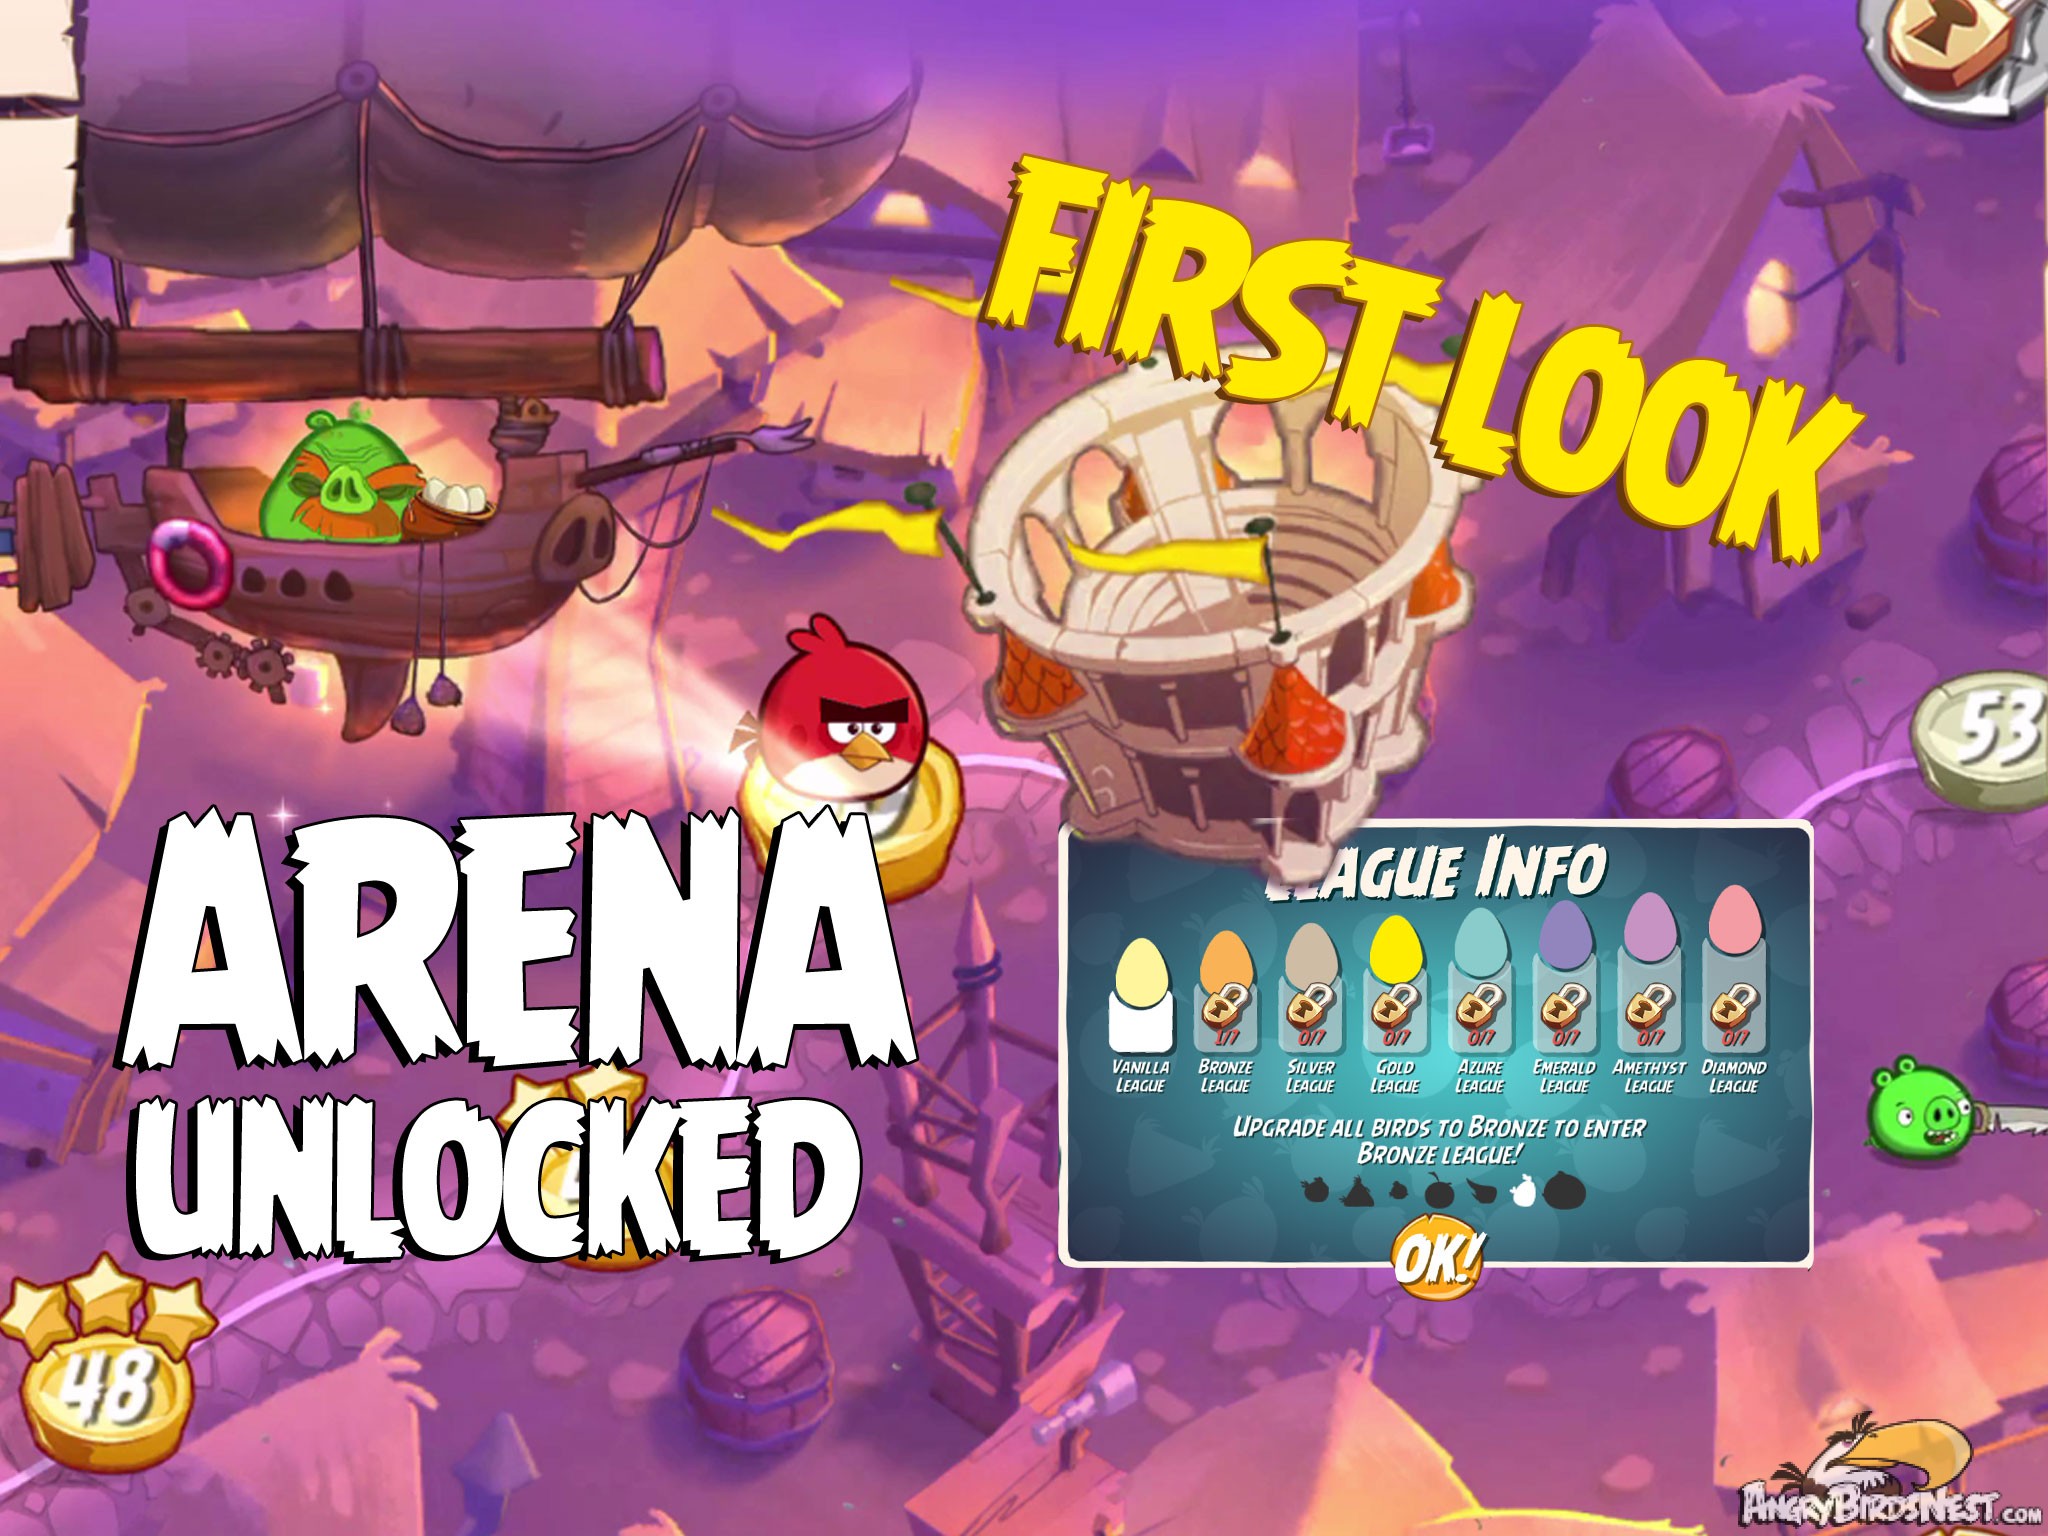 Angry Birds Under Pigstruction First Look at the Arena Tournaments Featured Image